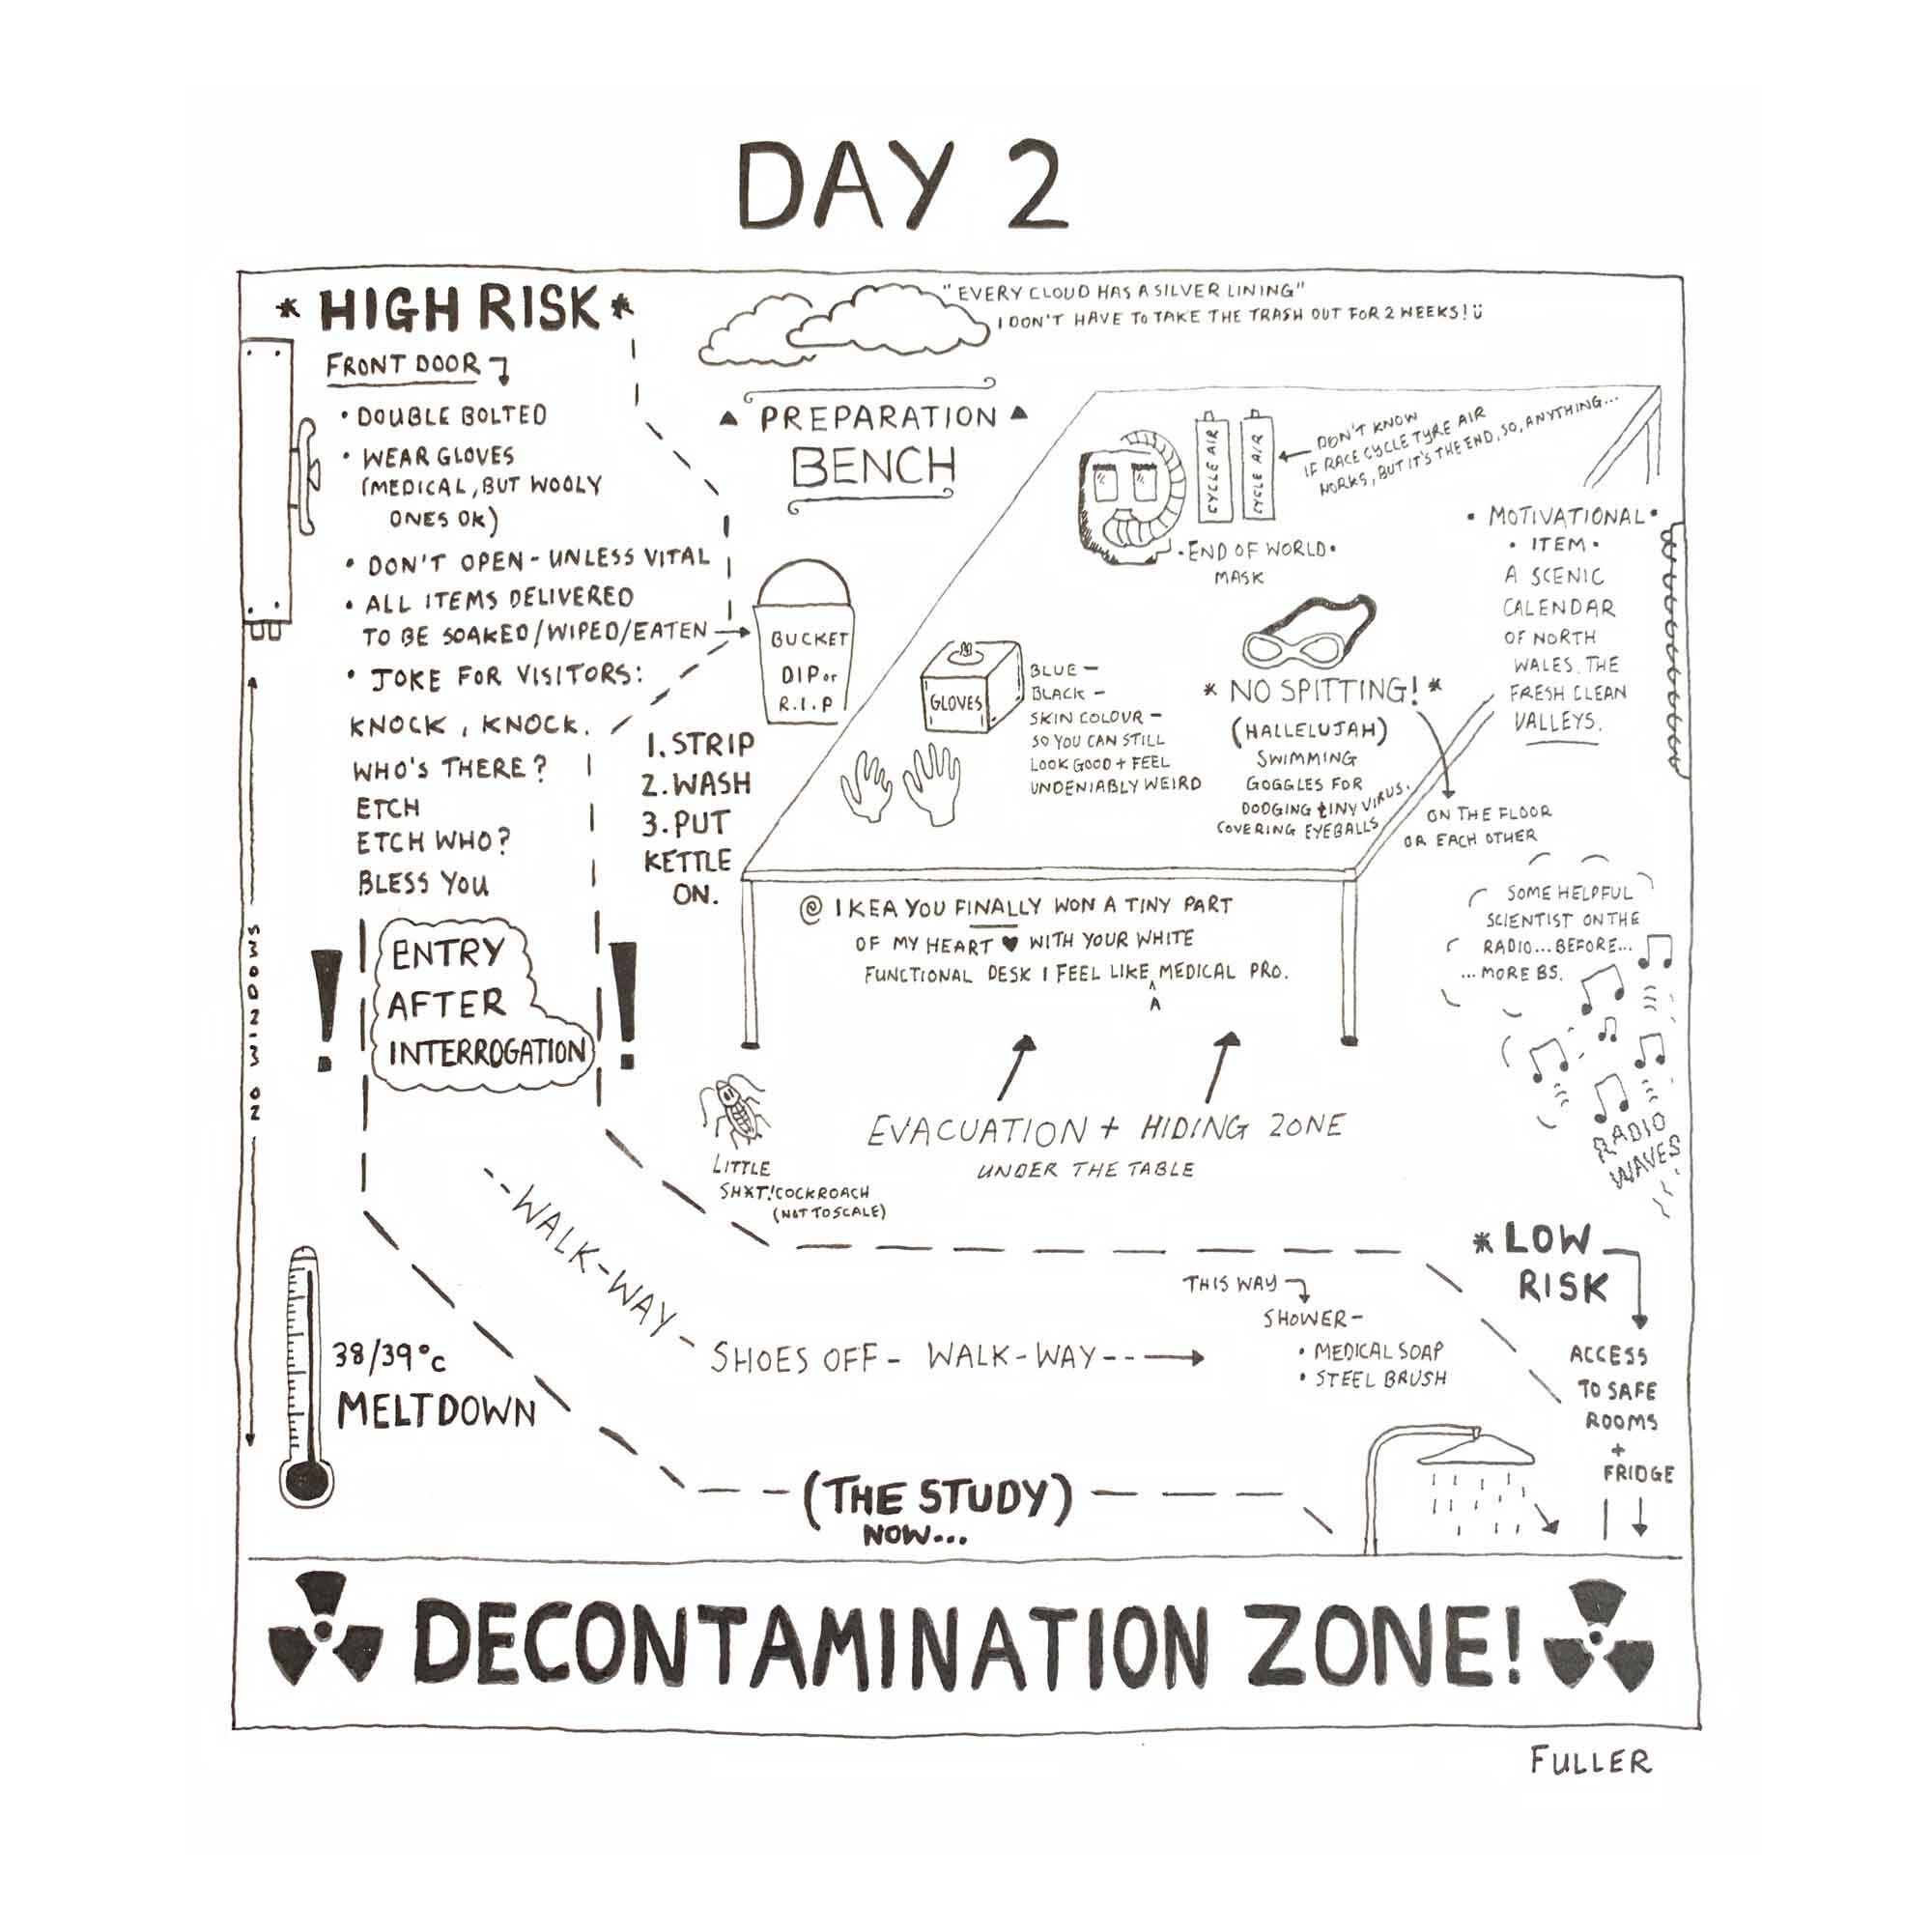 DAY 2 / Quarantine May By FULLER (Copy)